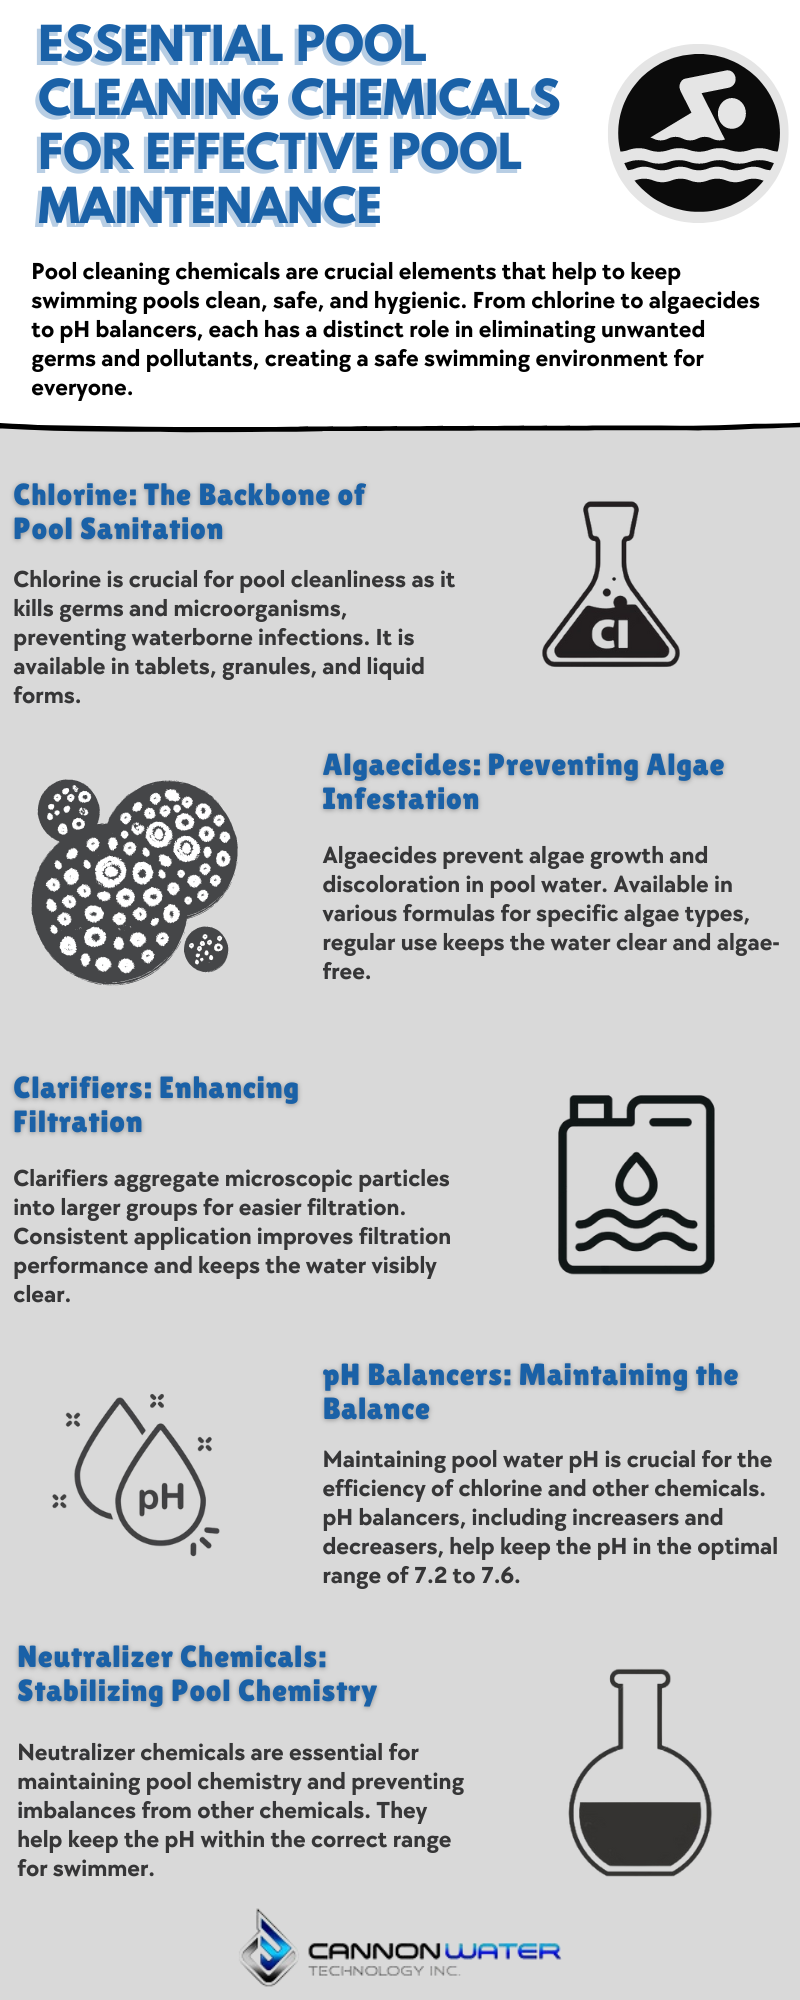 Essential Pool Cleaning Chemicals for Effective Pool MaintenanceThis infographic highlights the key Pool cleaning chemicals necessary for mainta...